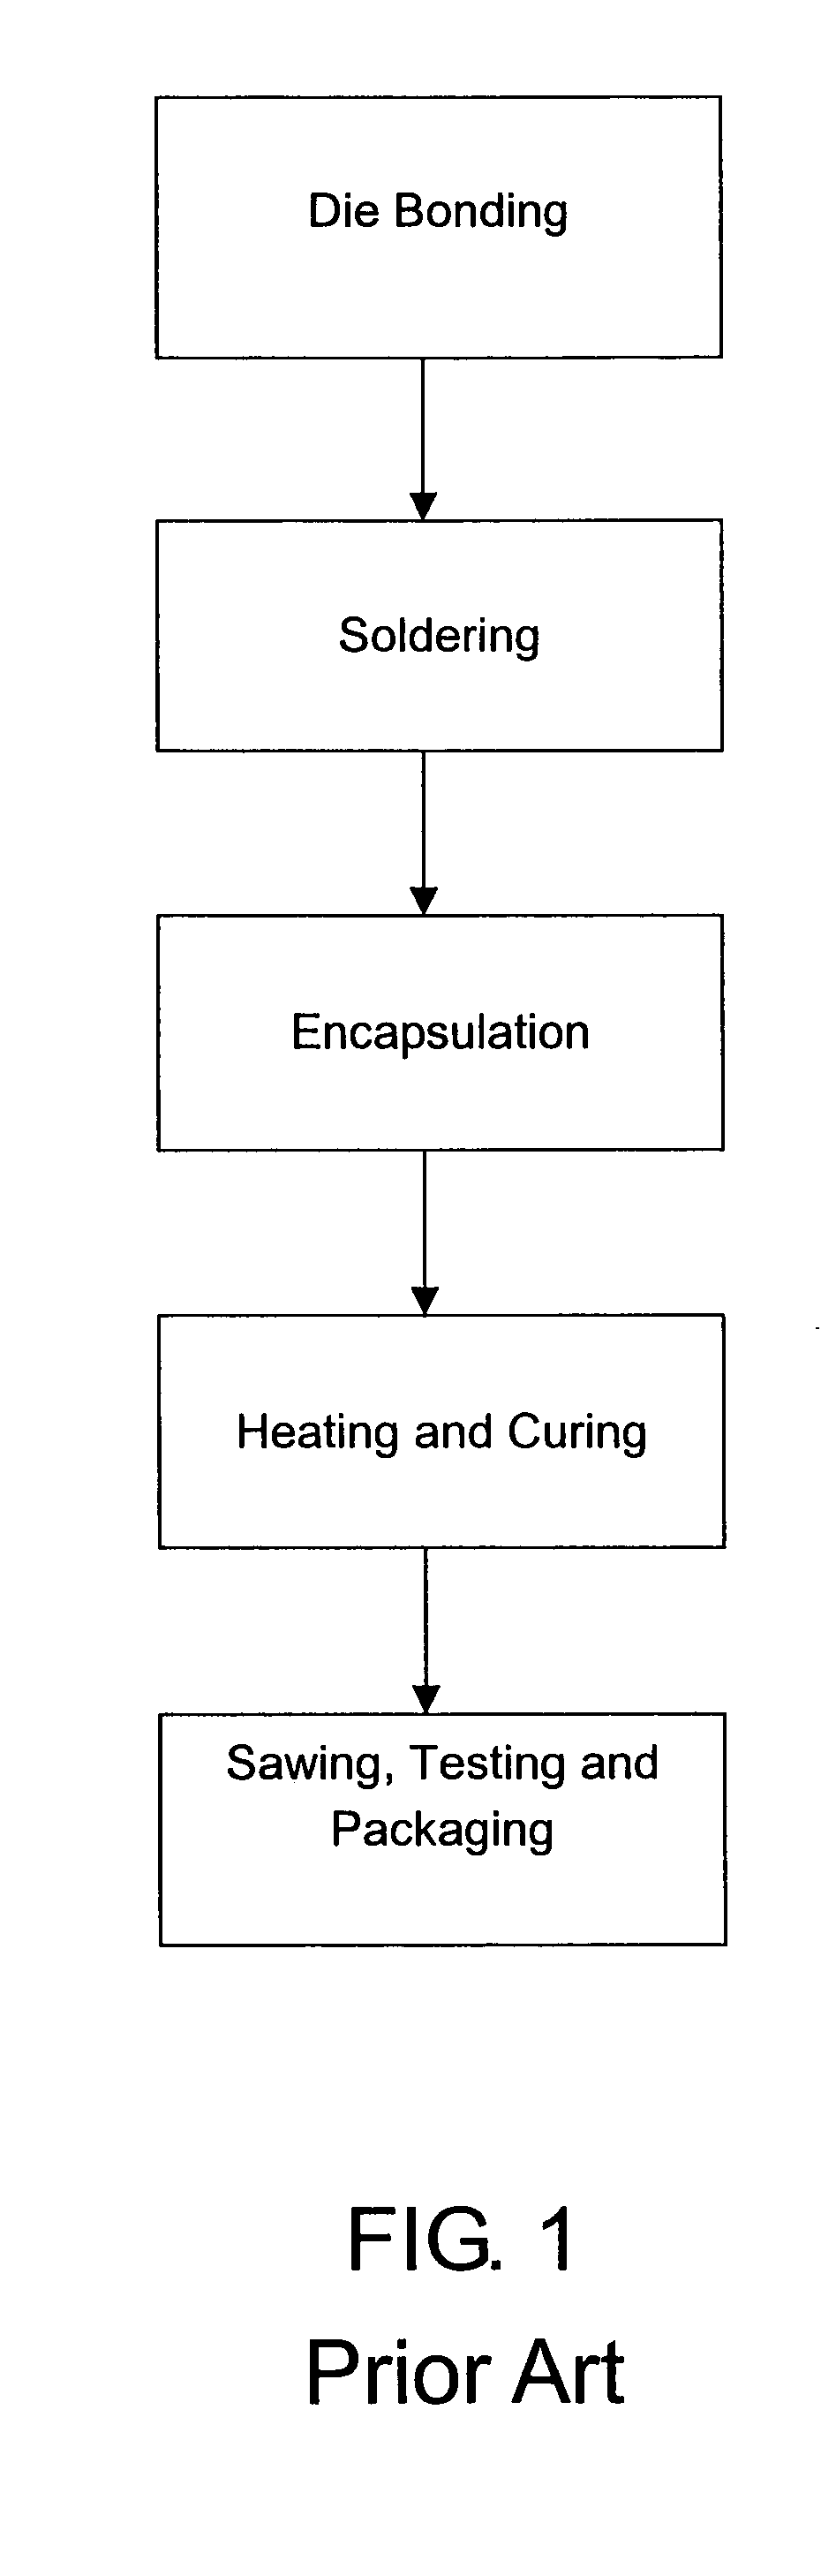 Light-emitting diode encapsulation material and manufacturing process